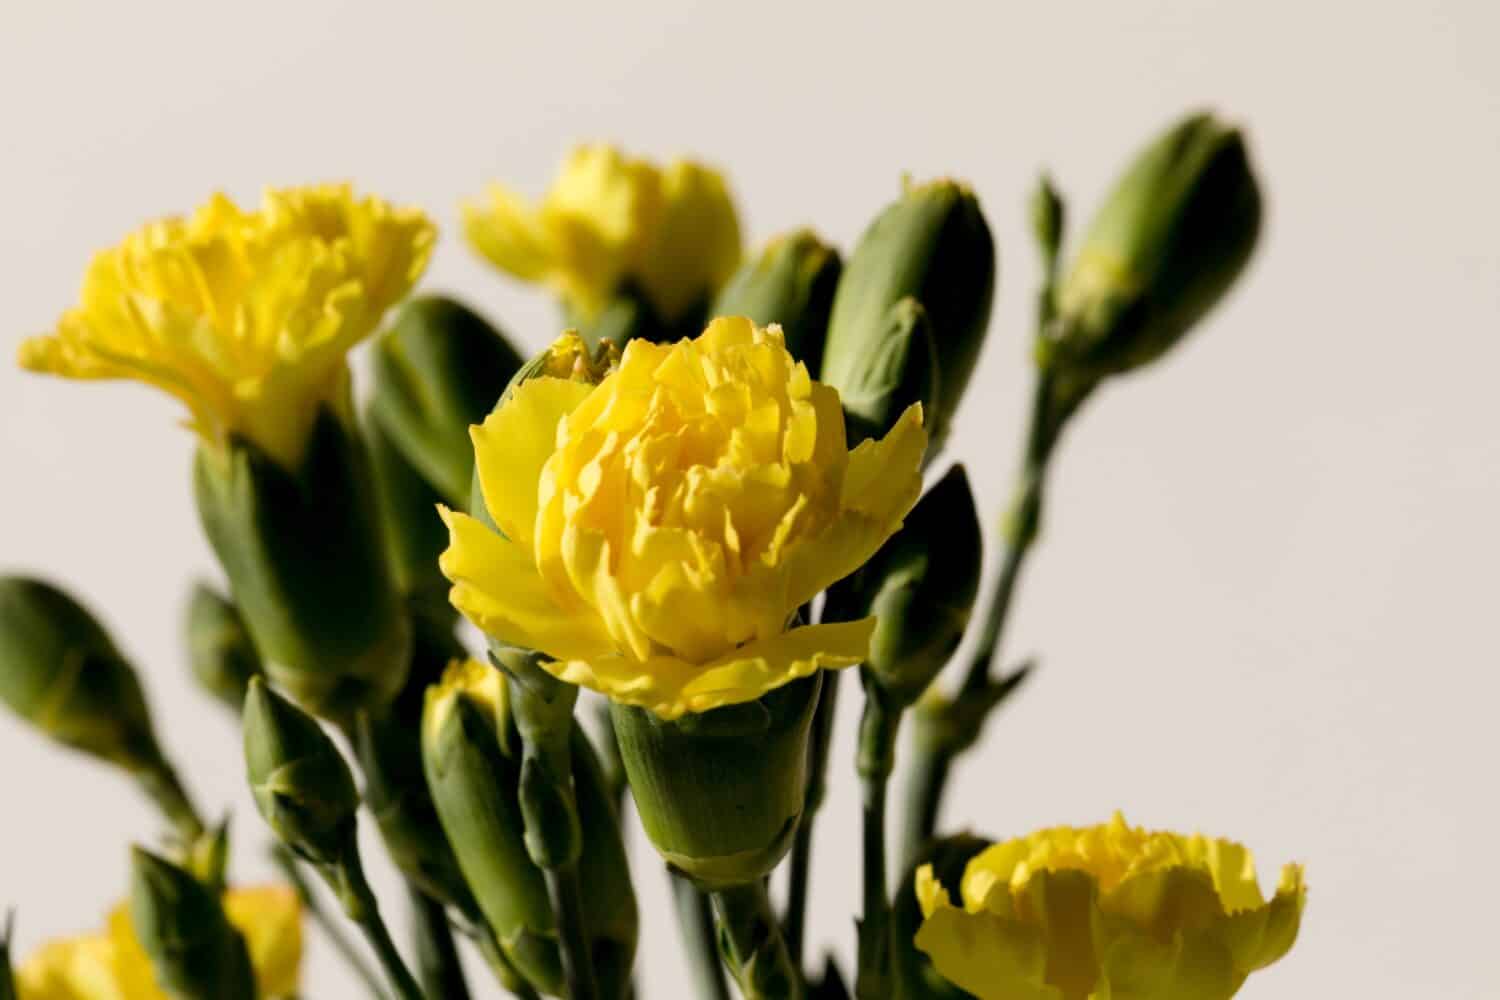 Yellow carnation, live flowers in close-up